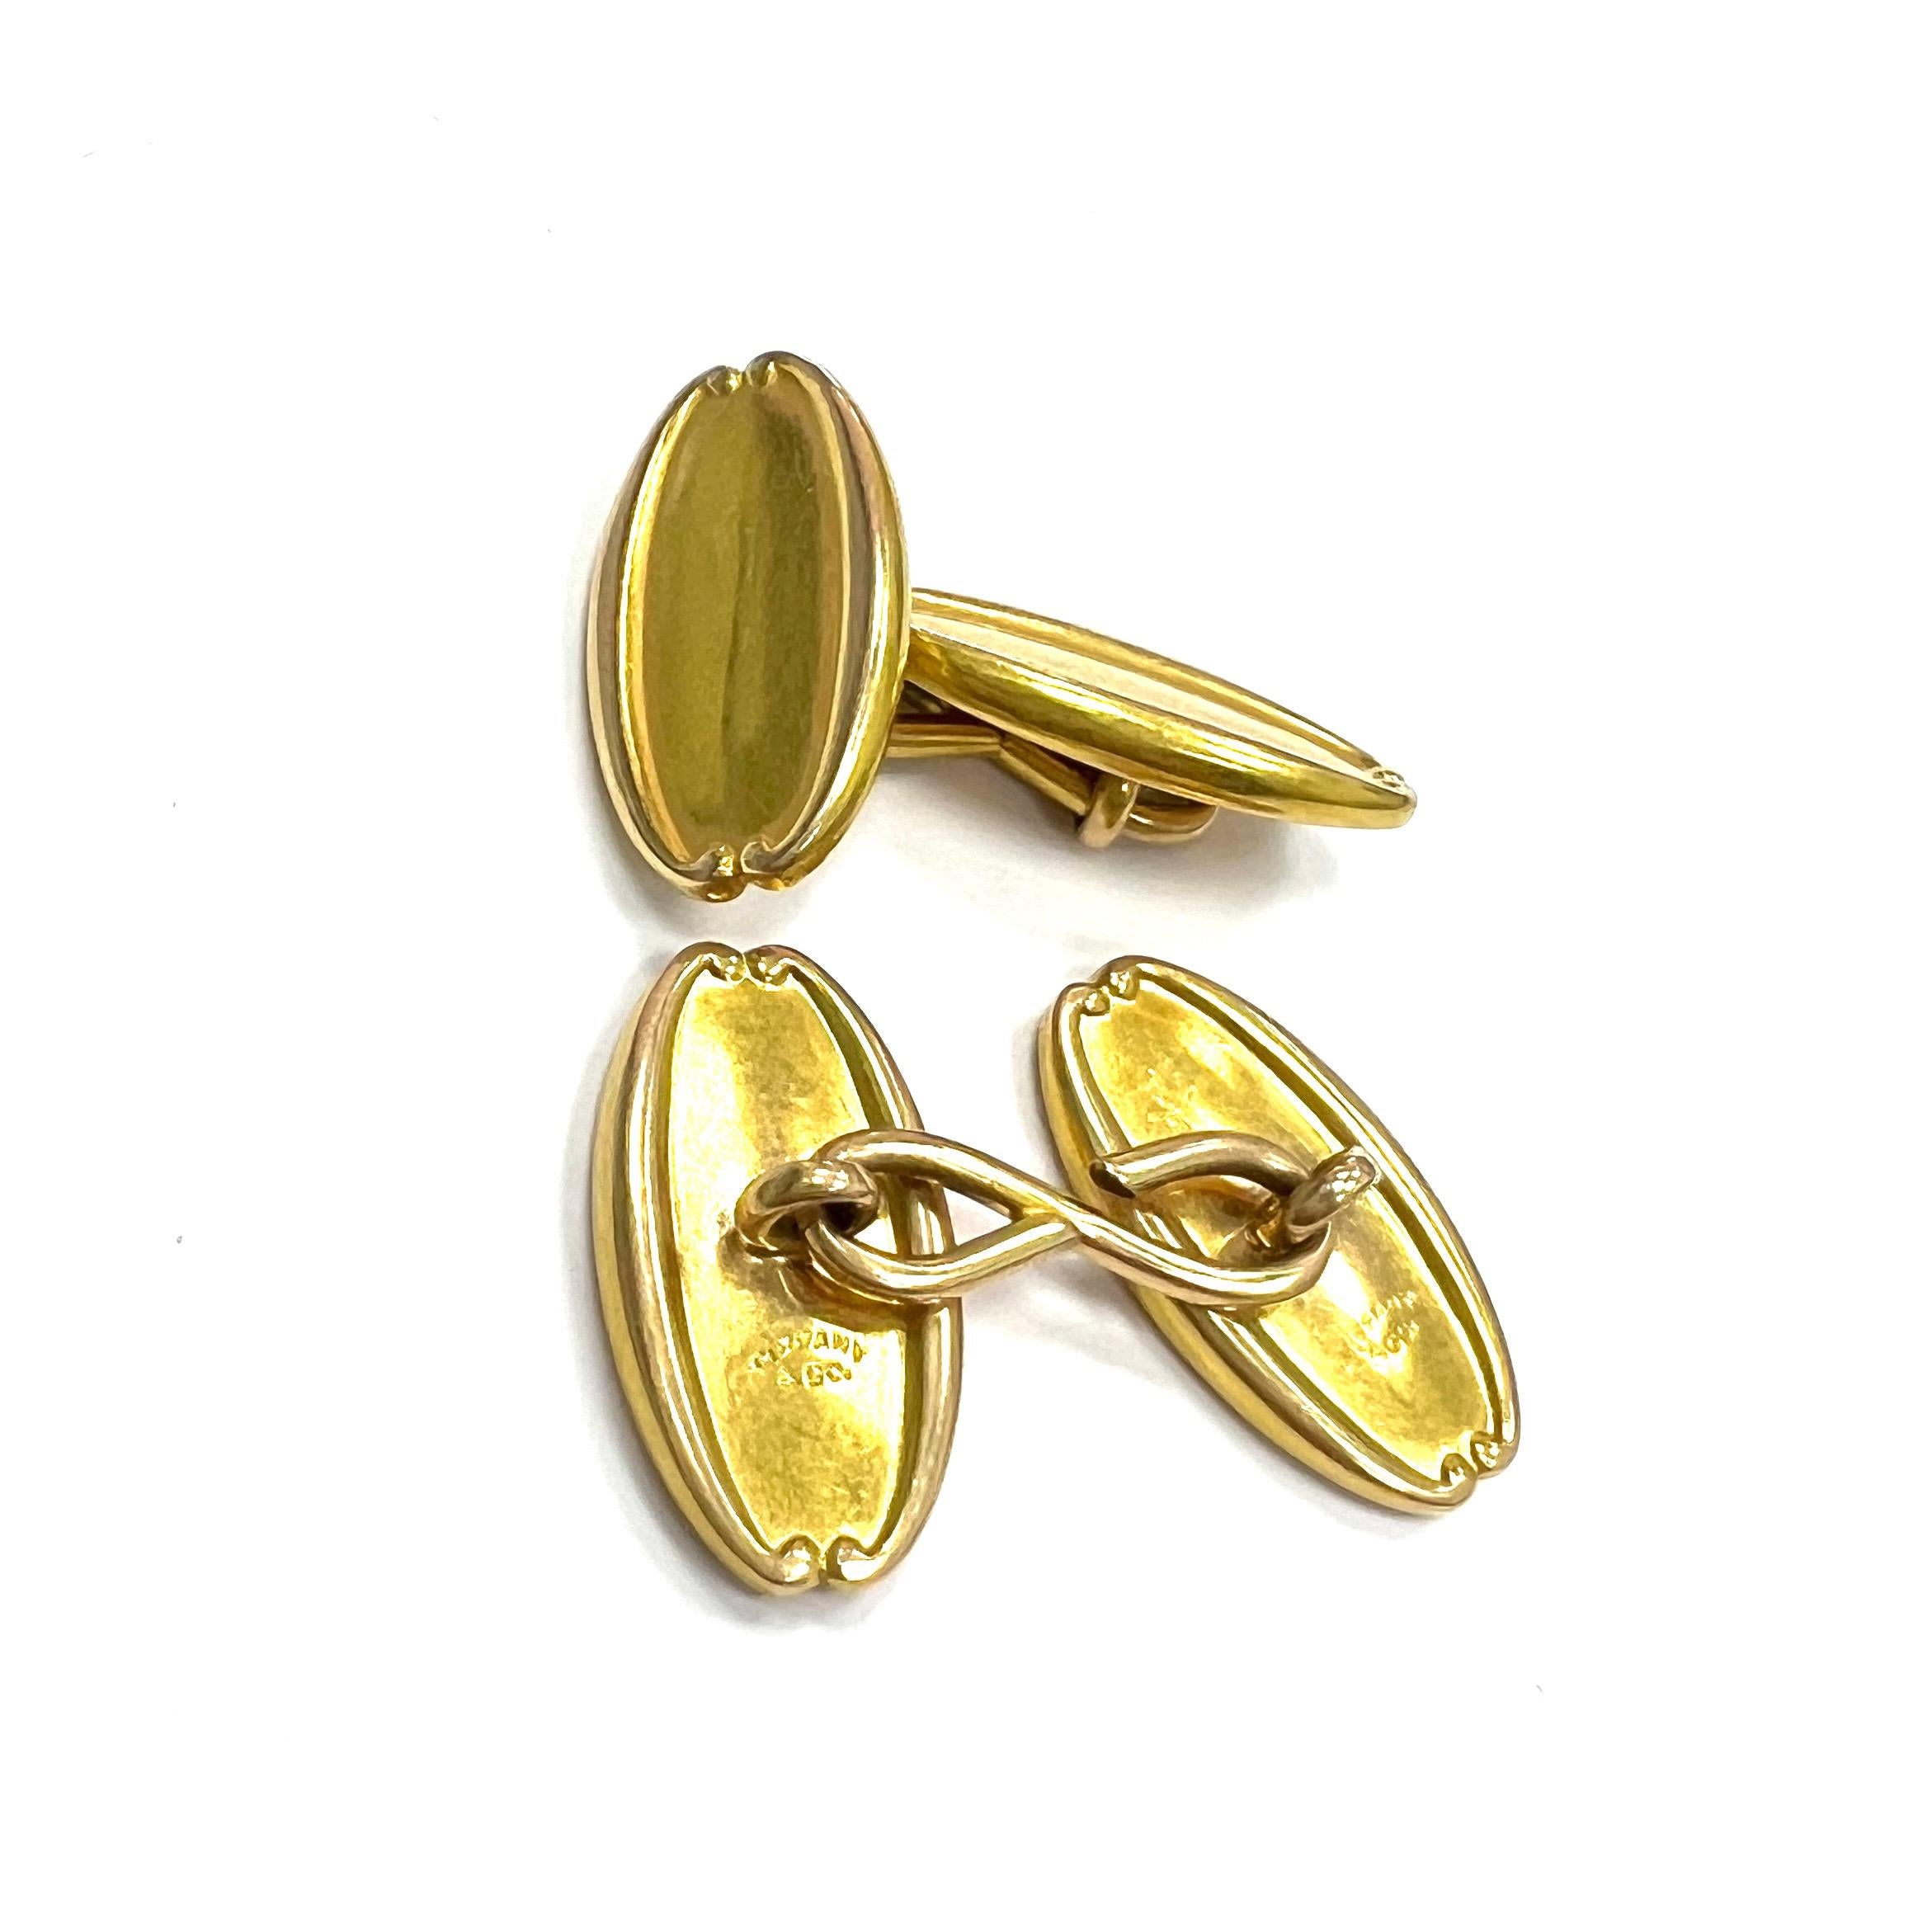 Tiffany & Co. Yellow Gold Cufflinks In Excellent Condition For Sale In New York, NY